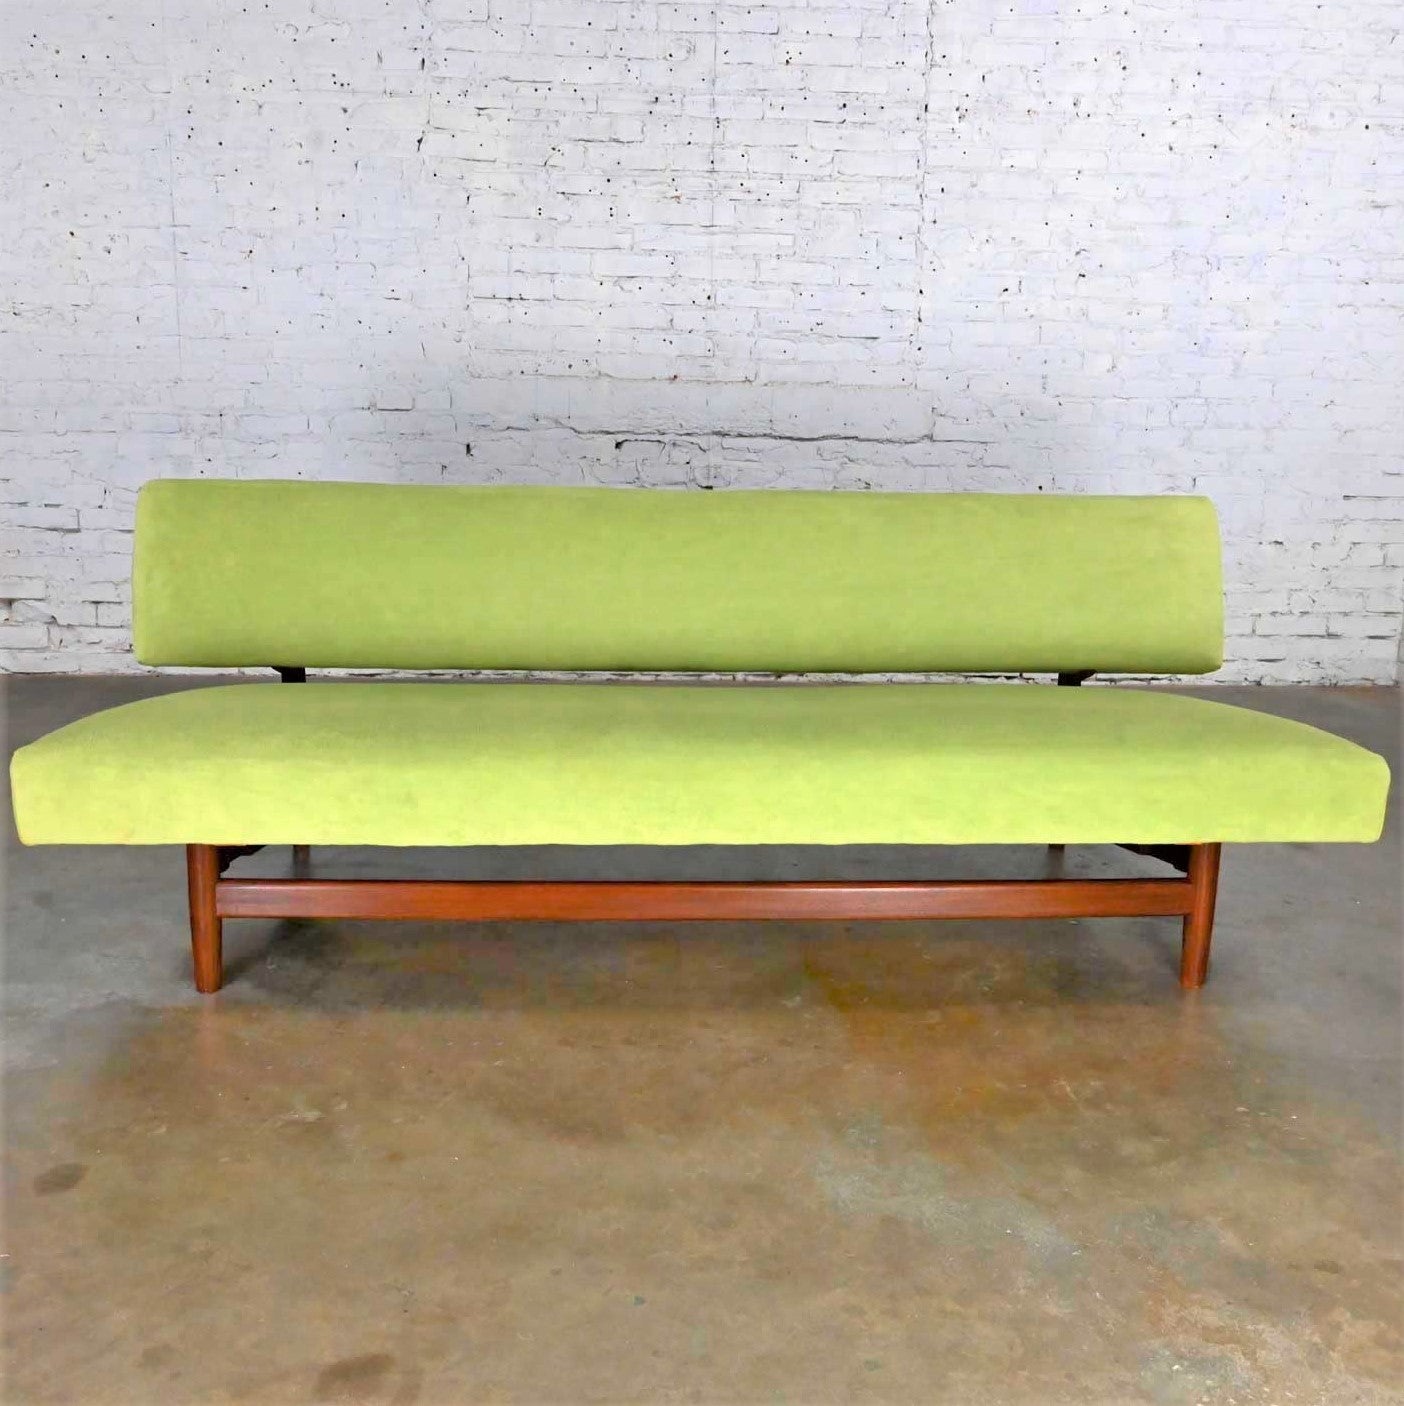 Stunning vintage Scandinavian Modern Dutch midcentury sofa attributed to Doublet Sofa by Rob Parry for Gelderland. It is made in Holland and comprised of a rosewood frame & stretcher with chartreuse green brushed chenille fabric. This piece has been